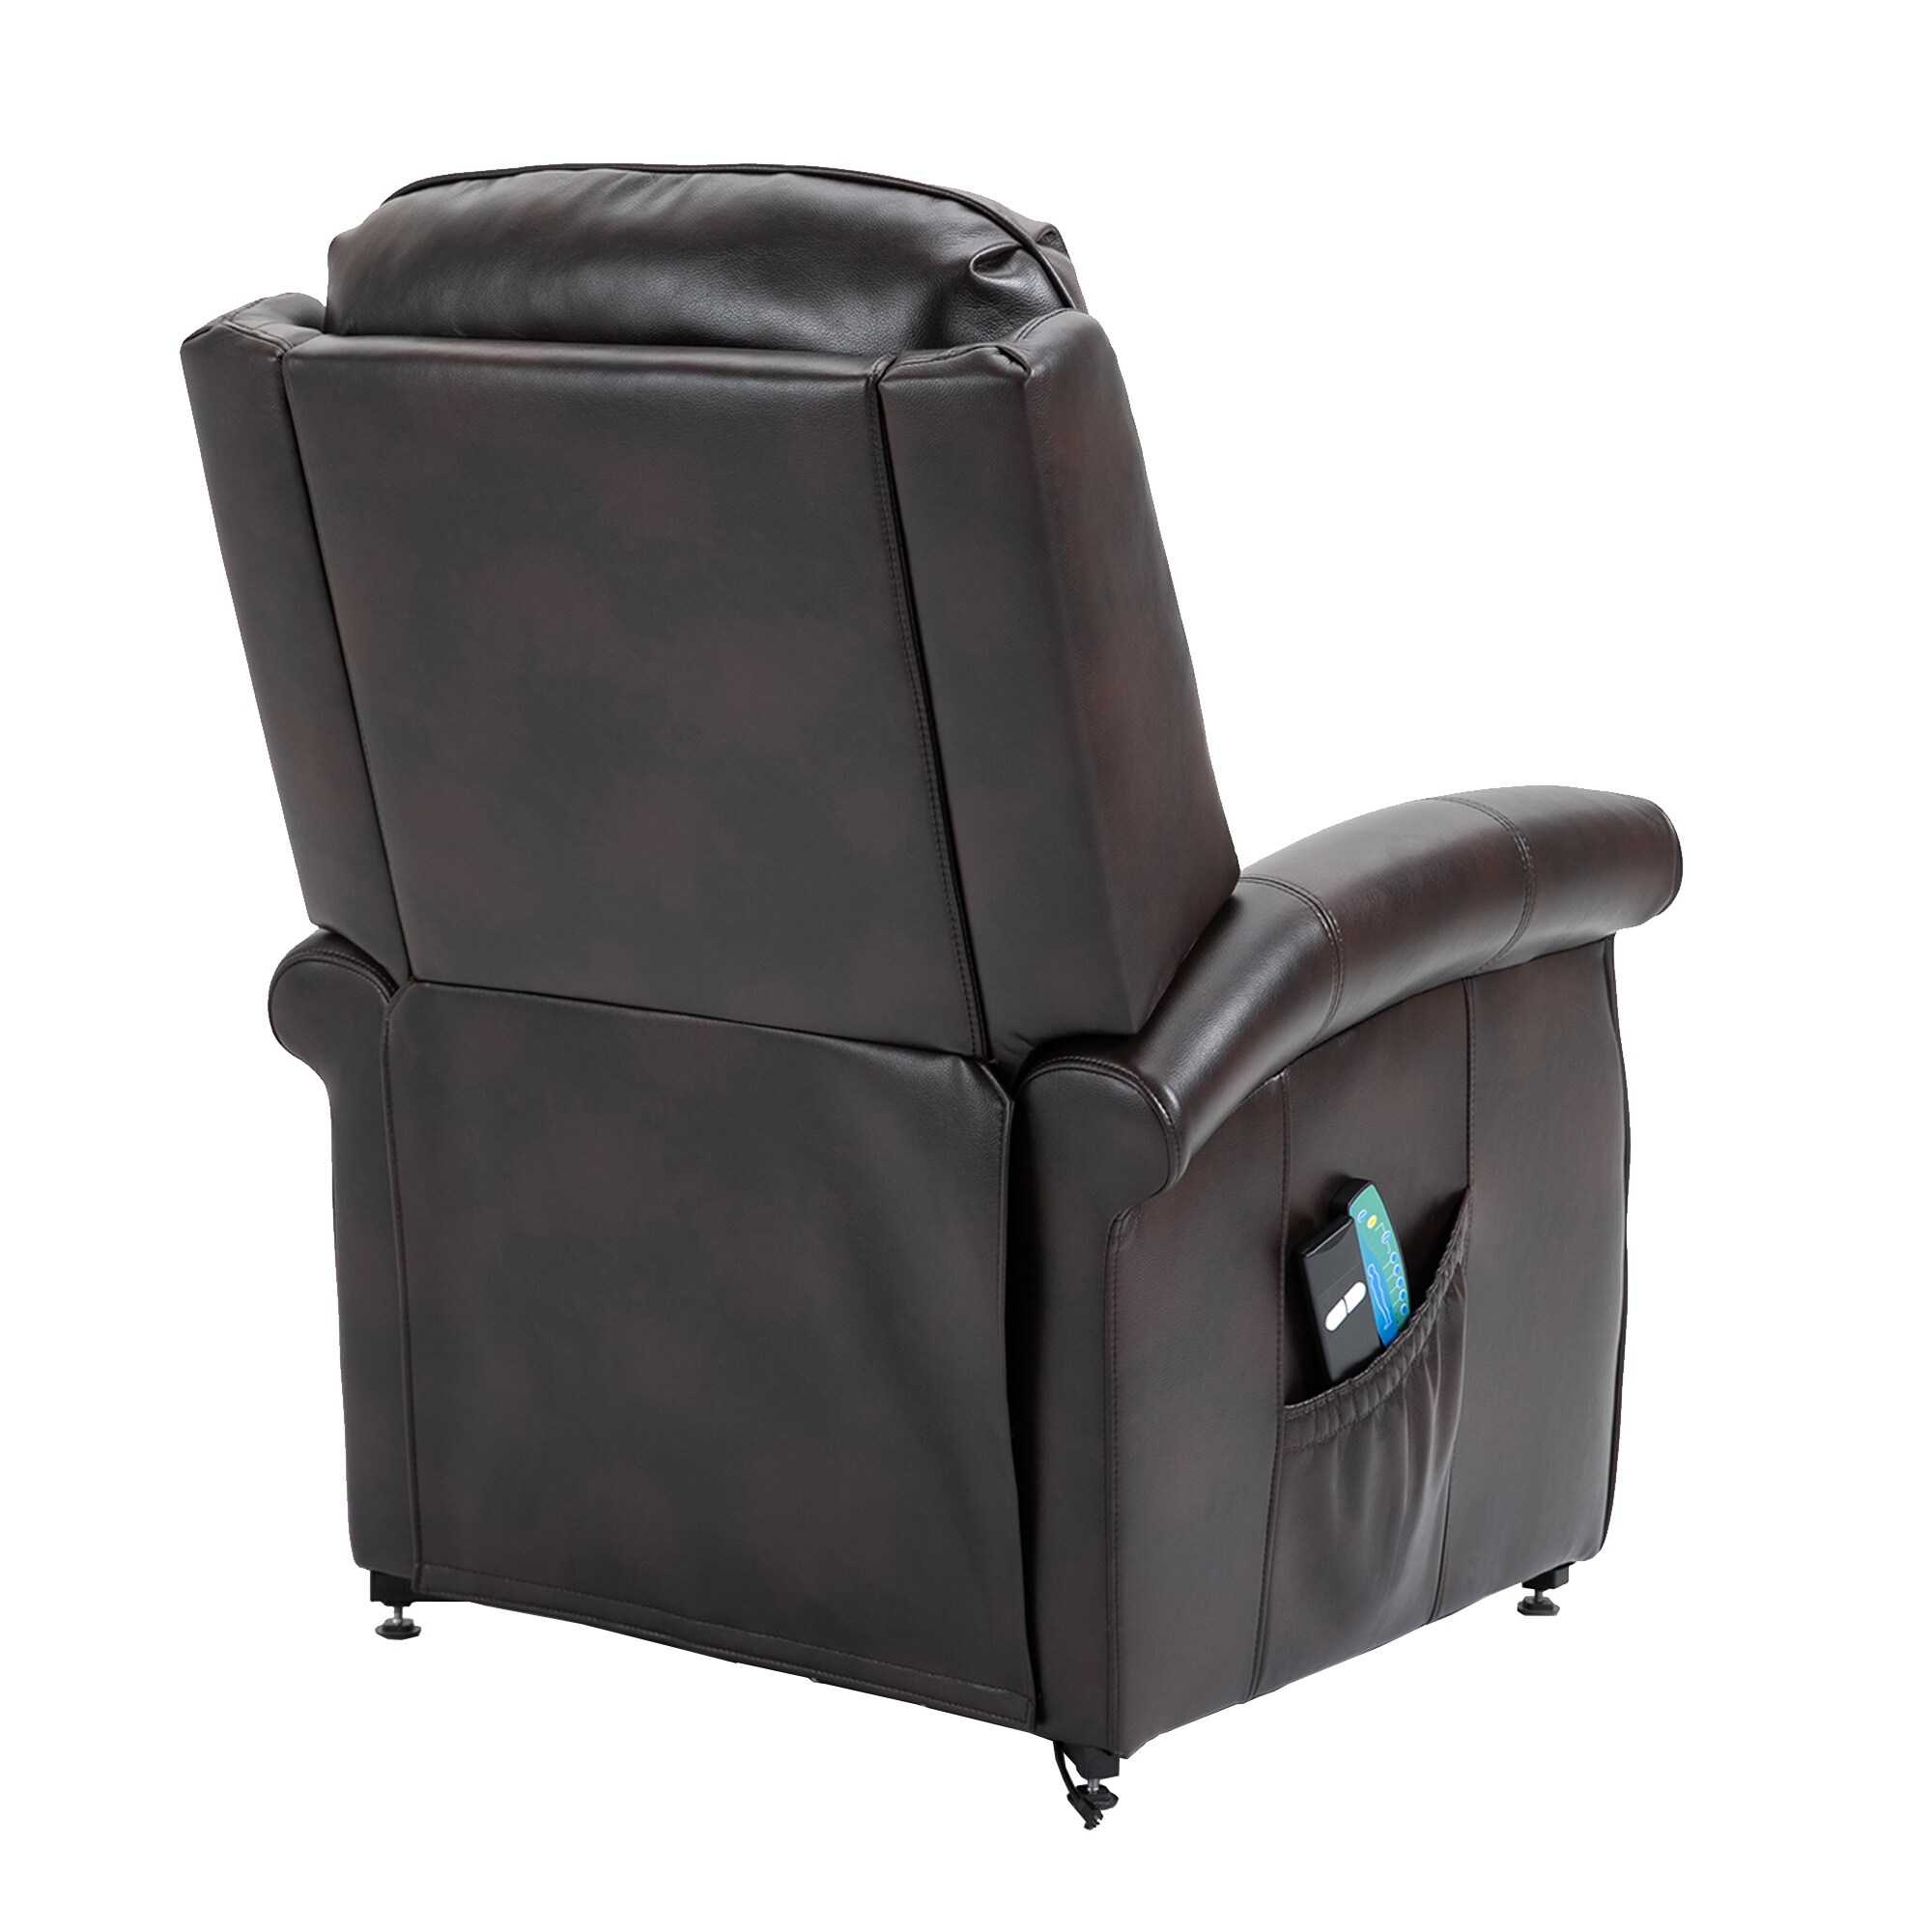 Clihome Recliner Brown Faux Leather Upholstered Powered Reclining ...